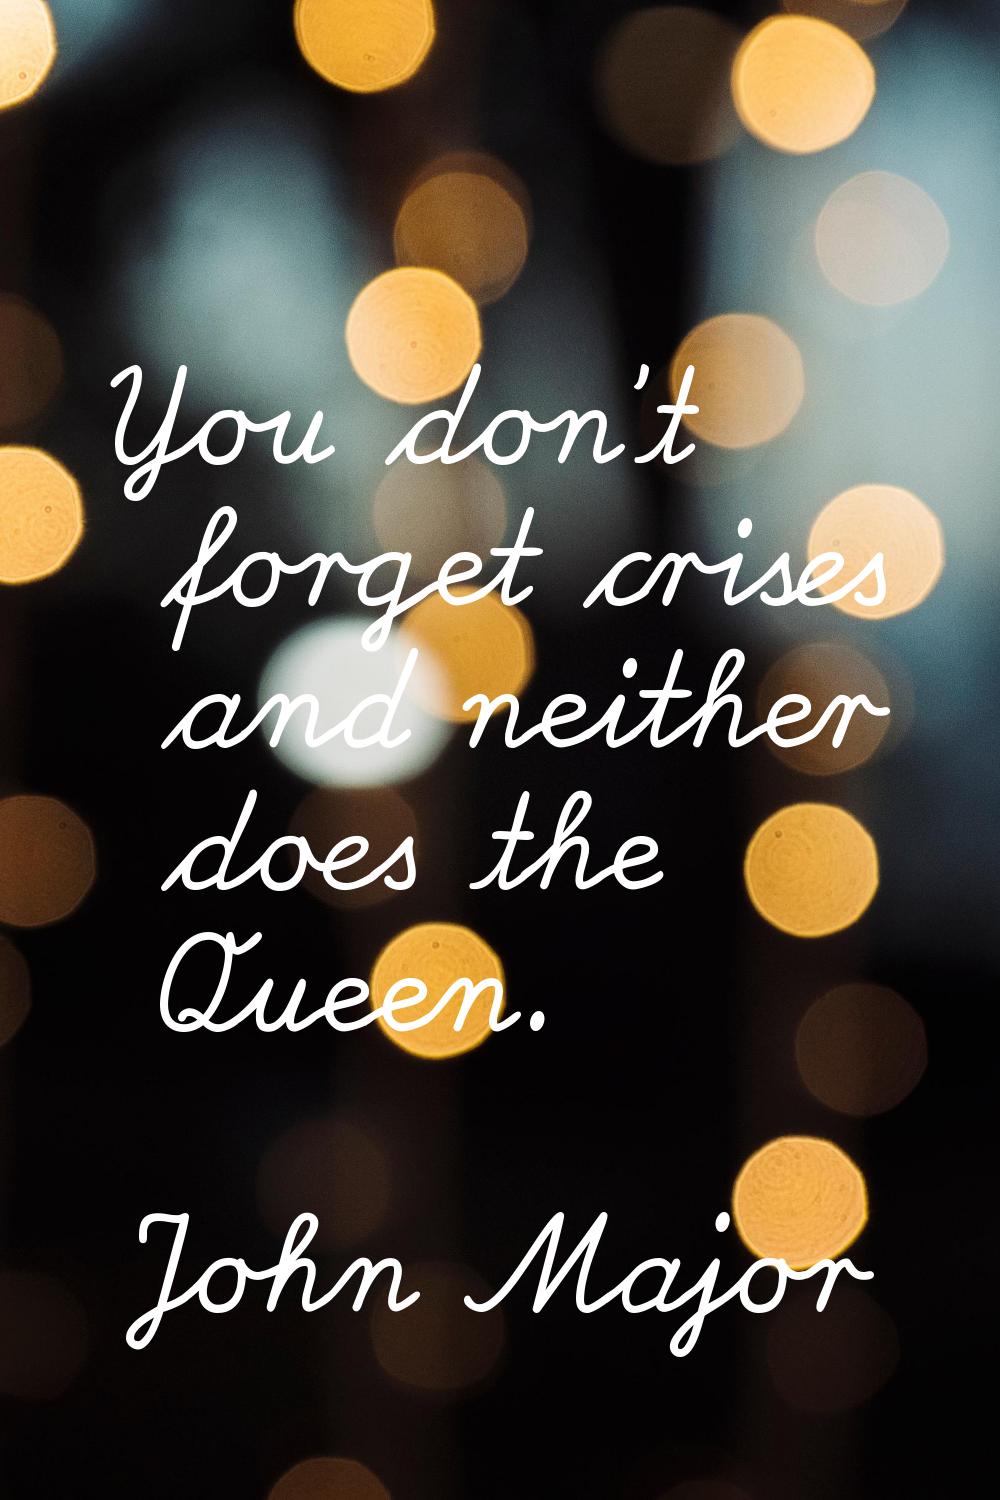 You don't forget crises and neither does the Queen.